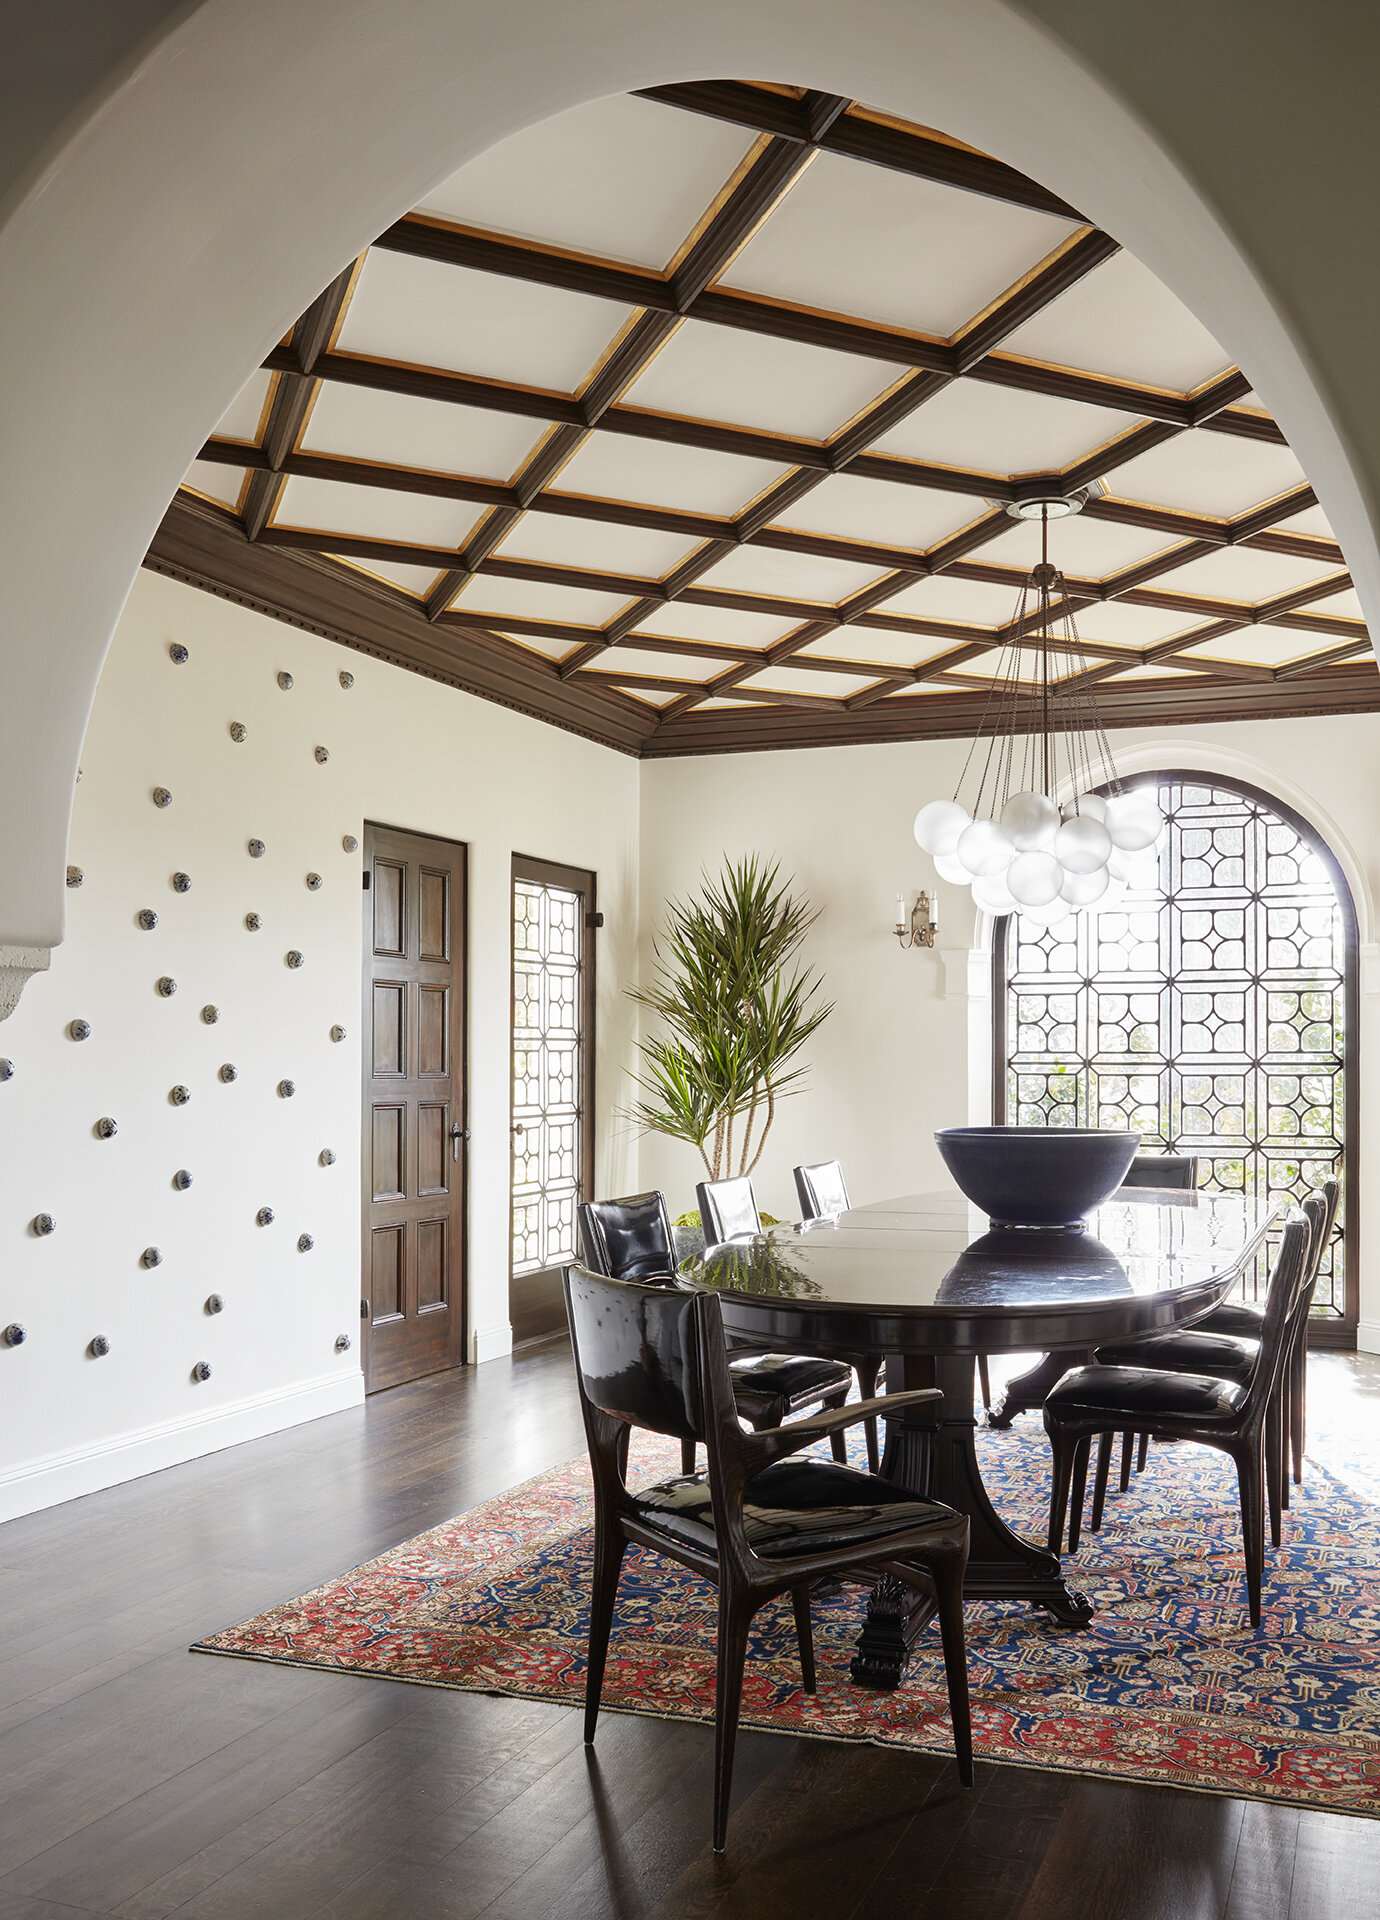  Best general contractor builder traditional Spanish Colonial estate home in the Brentwood neighborhood of Los Angeles with trendy eclectic interior designer style featured in Architectural Digest.  